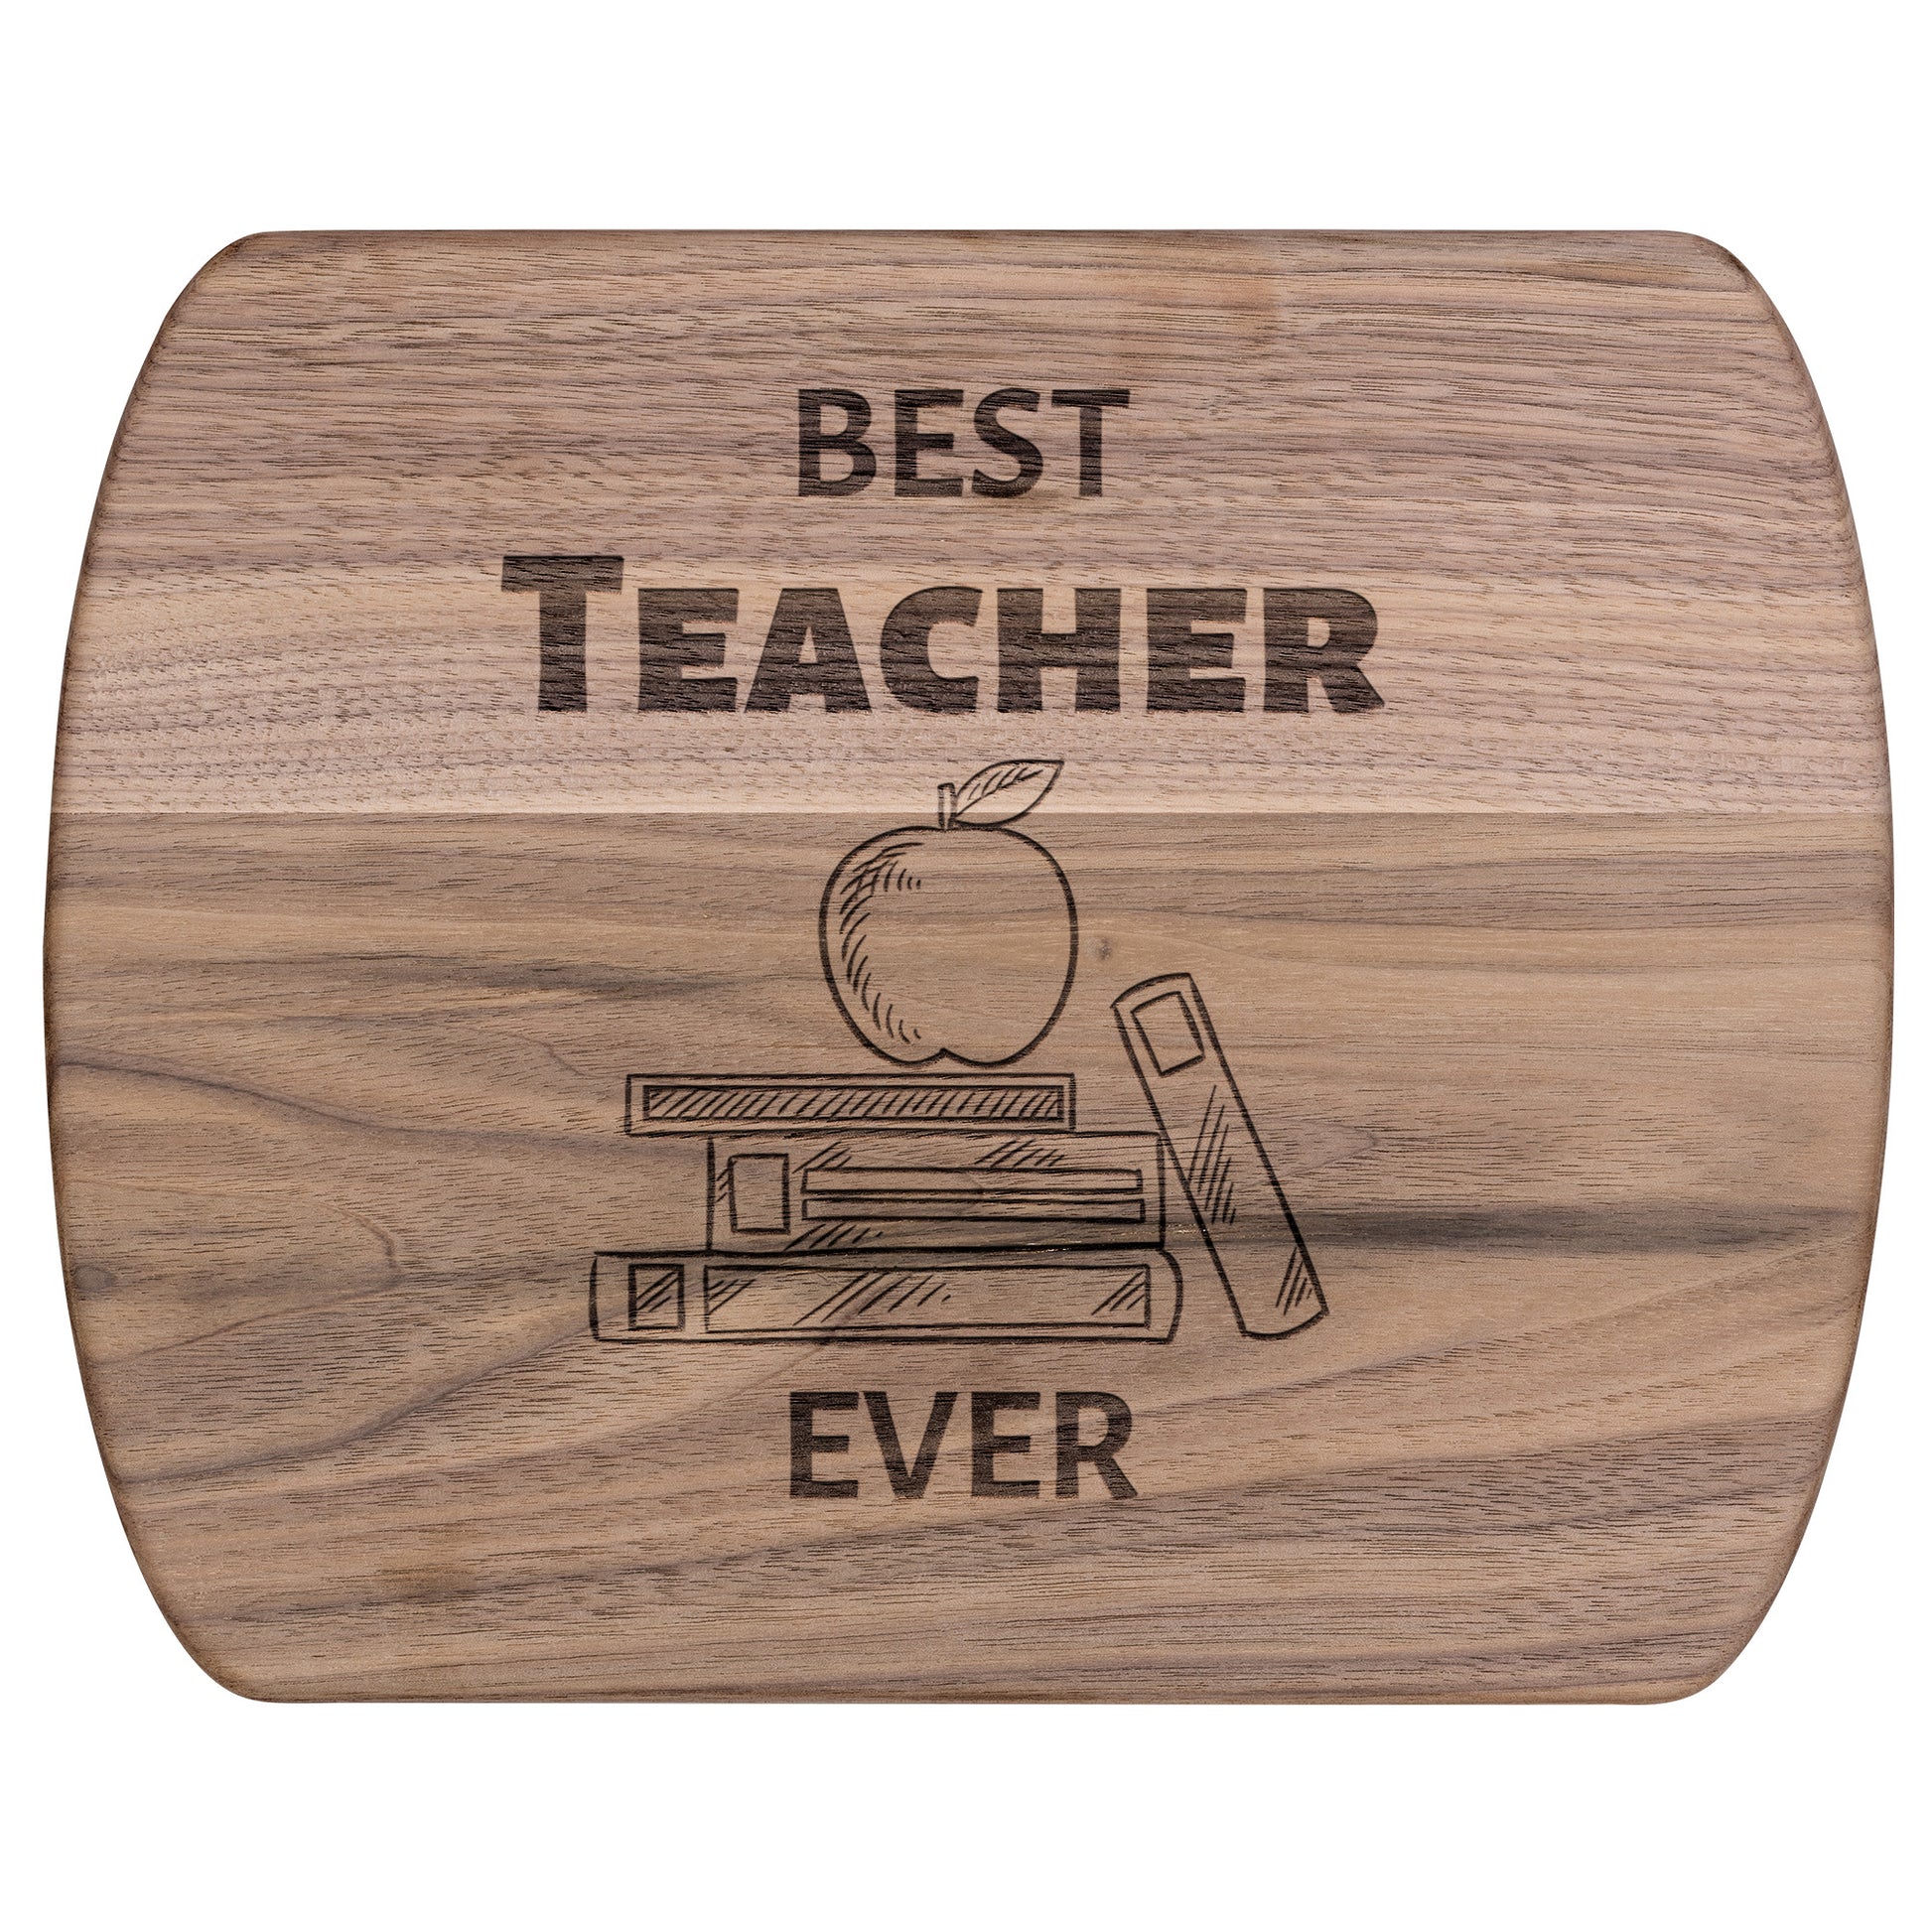 "Best Teacher Ever" Hardwood Cutting Board - Weave Got Gifts - Unique Gifts You Won’t Find Anywhere Else!